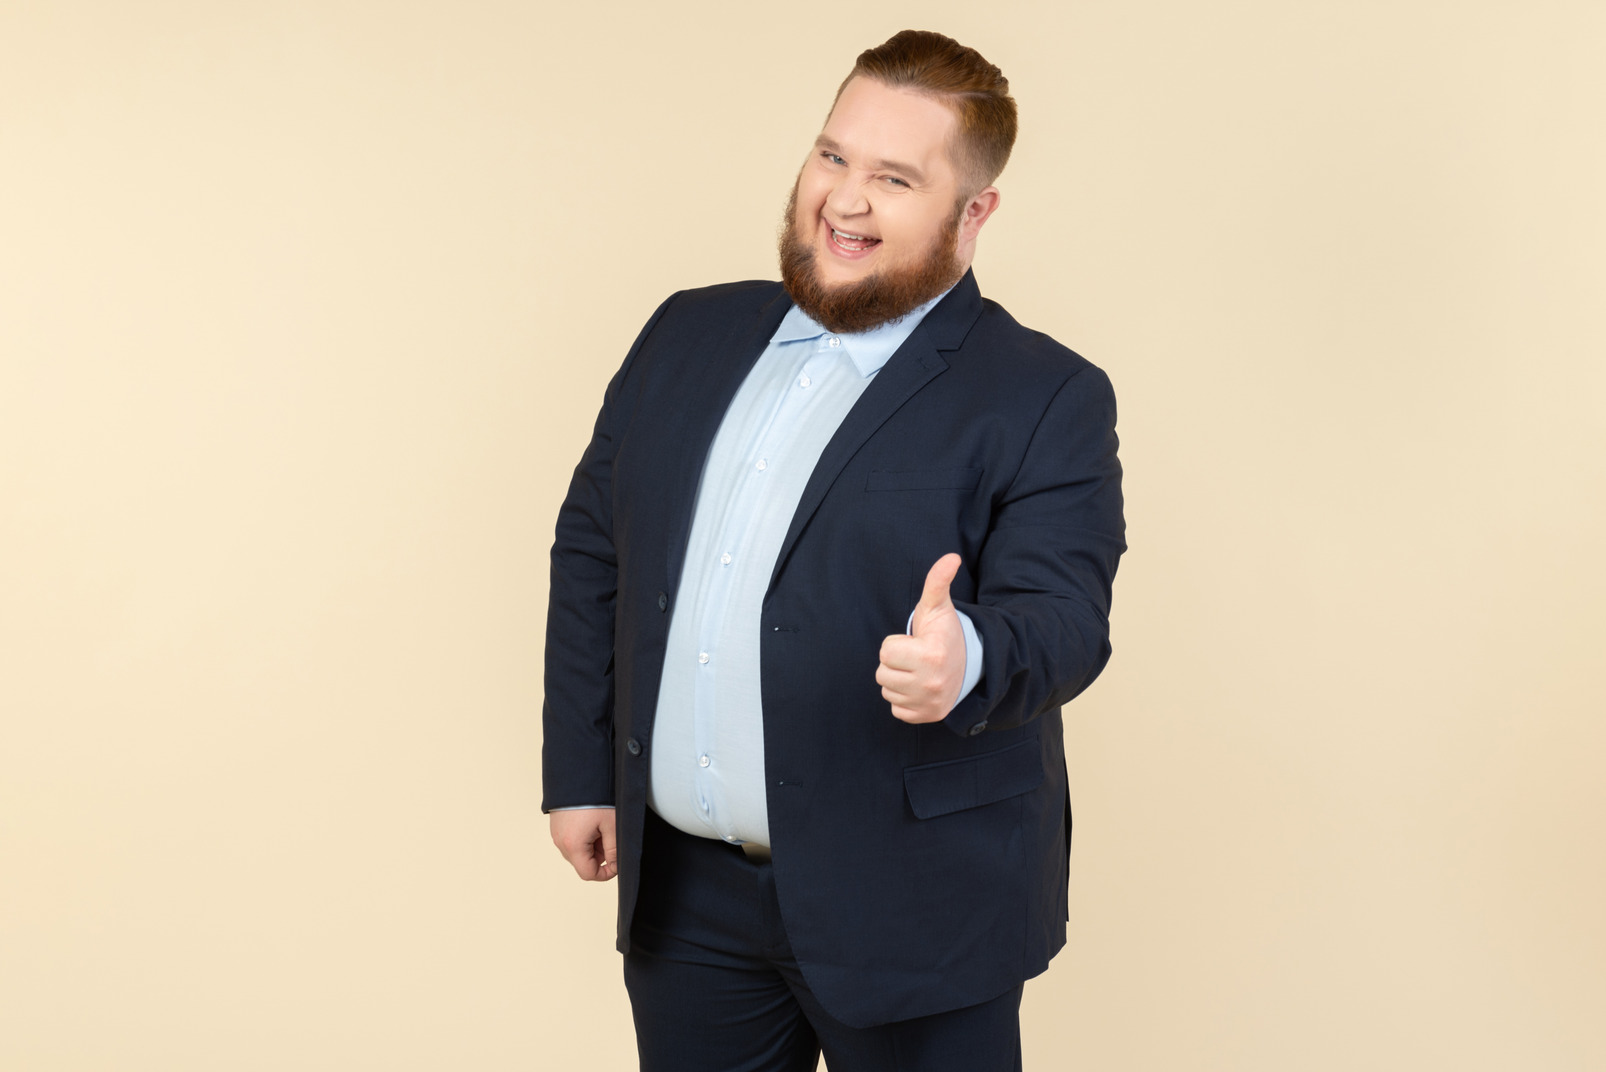 Young overweight man in suit showing thumb up